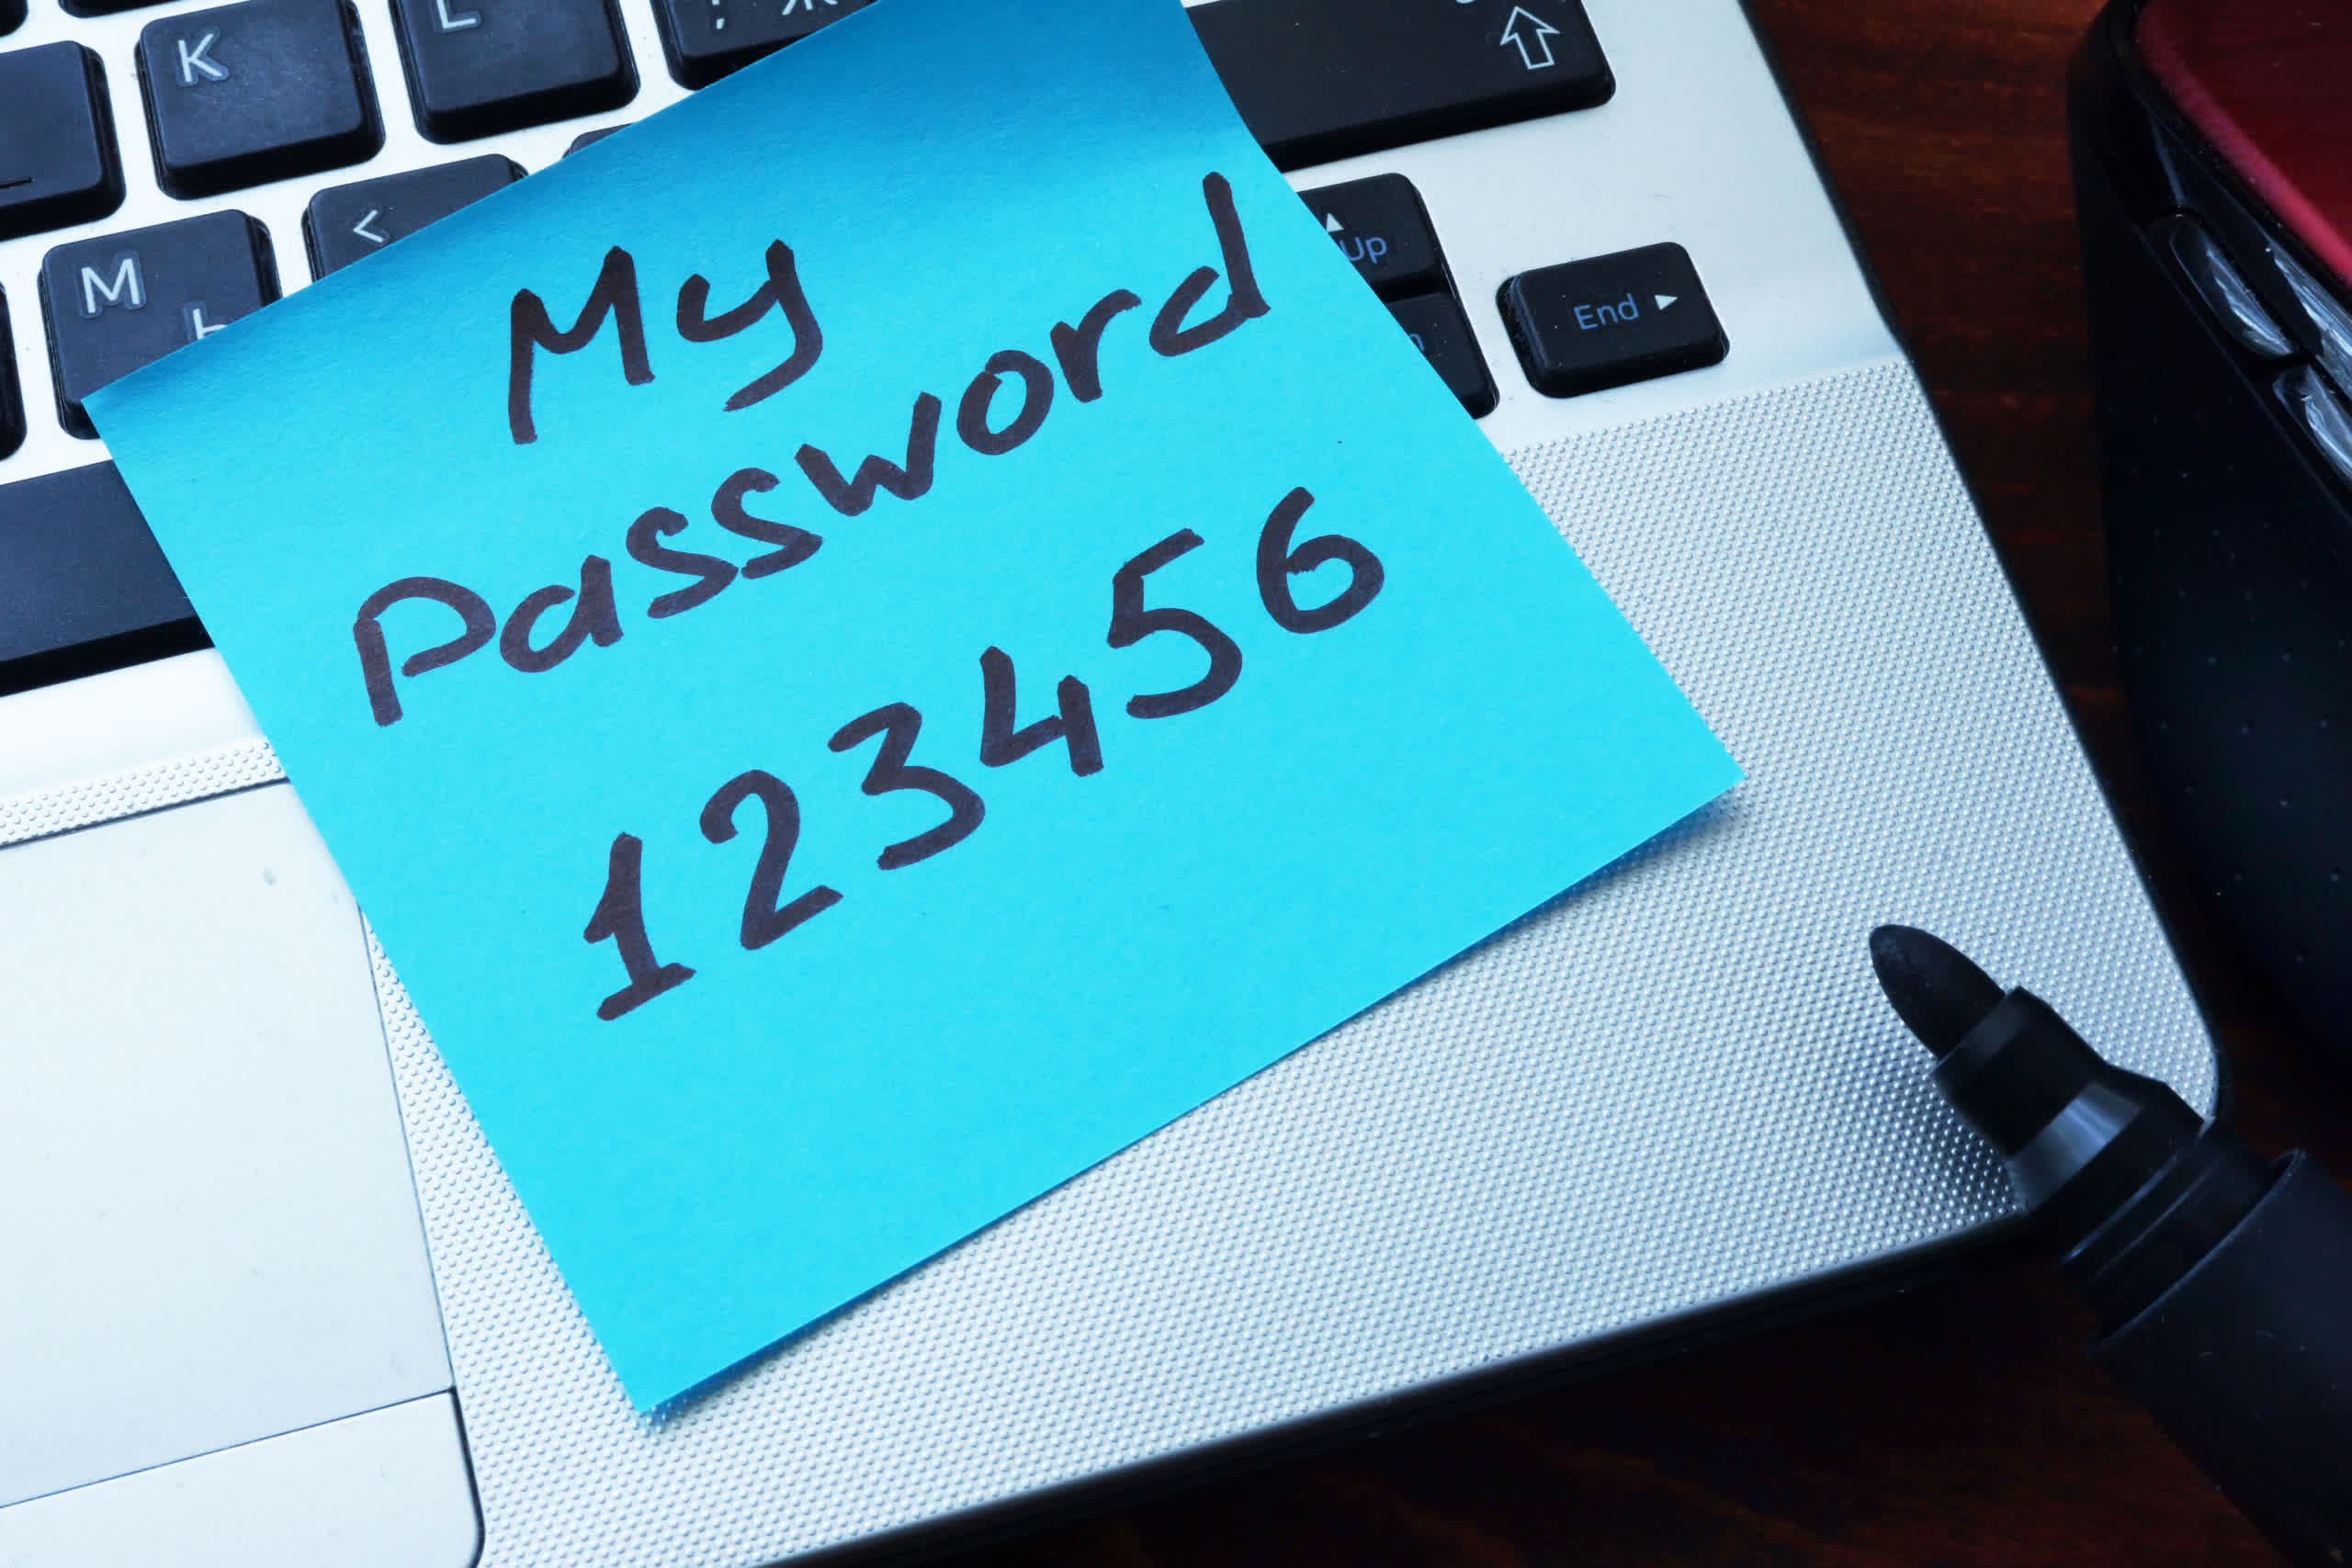 CEOs and other top executives use the same terrible passwords as other people